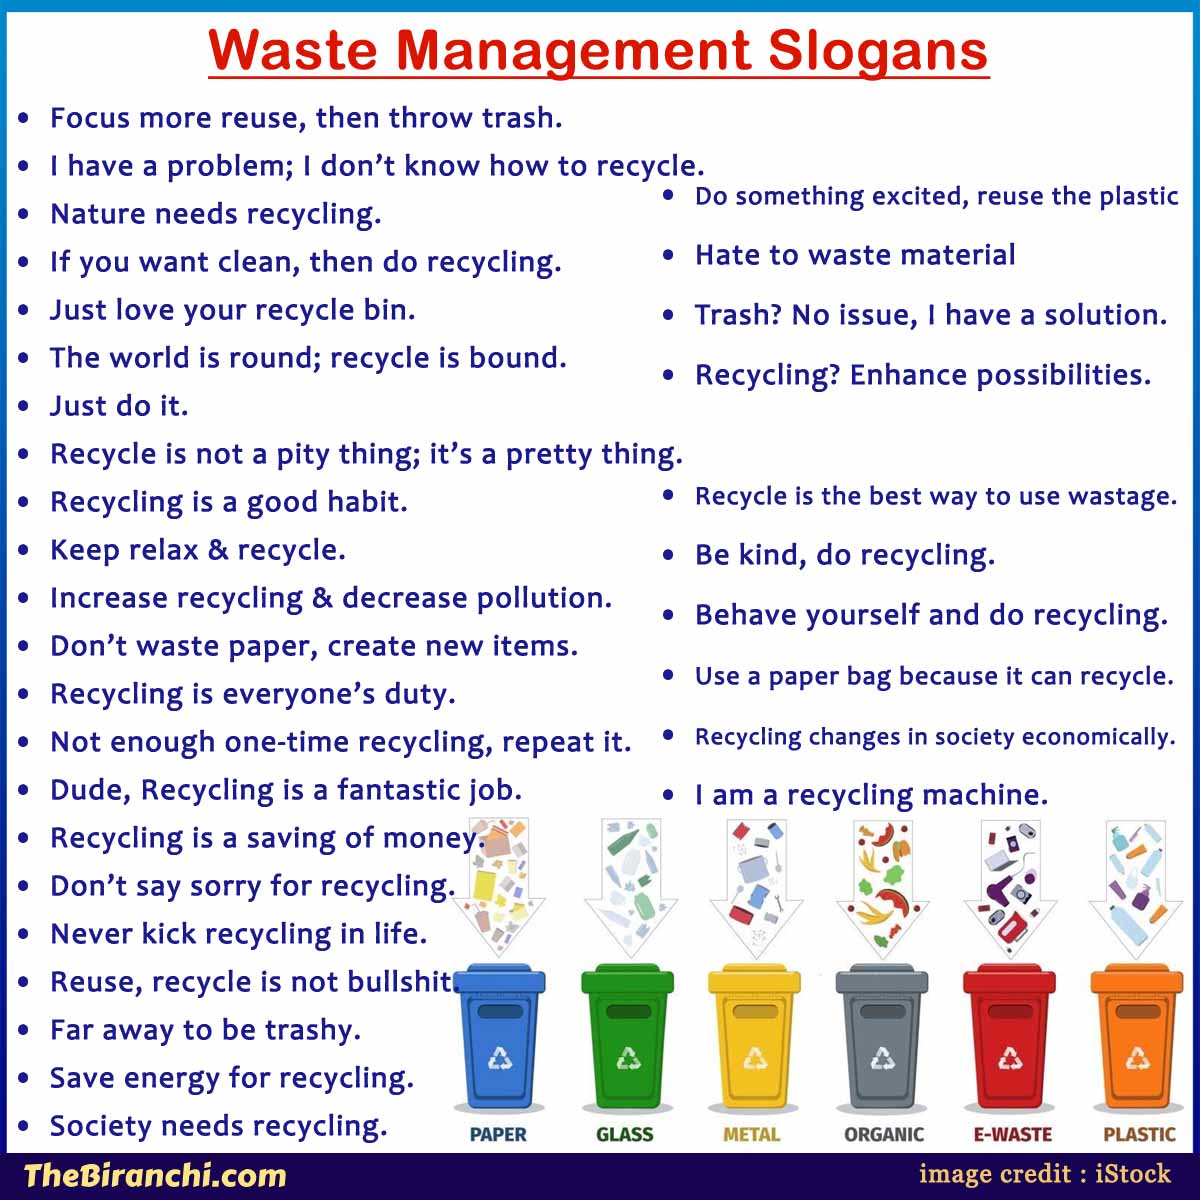 Best-waste-management-slogans-taglines-short-quotes-phrases-and-saying